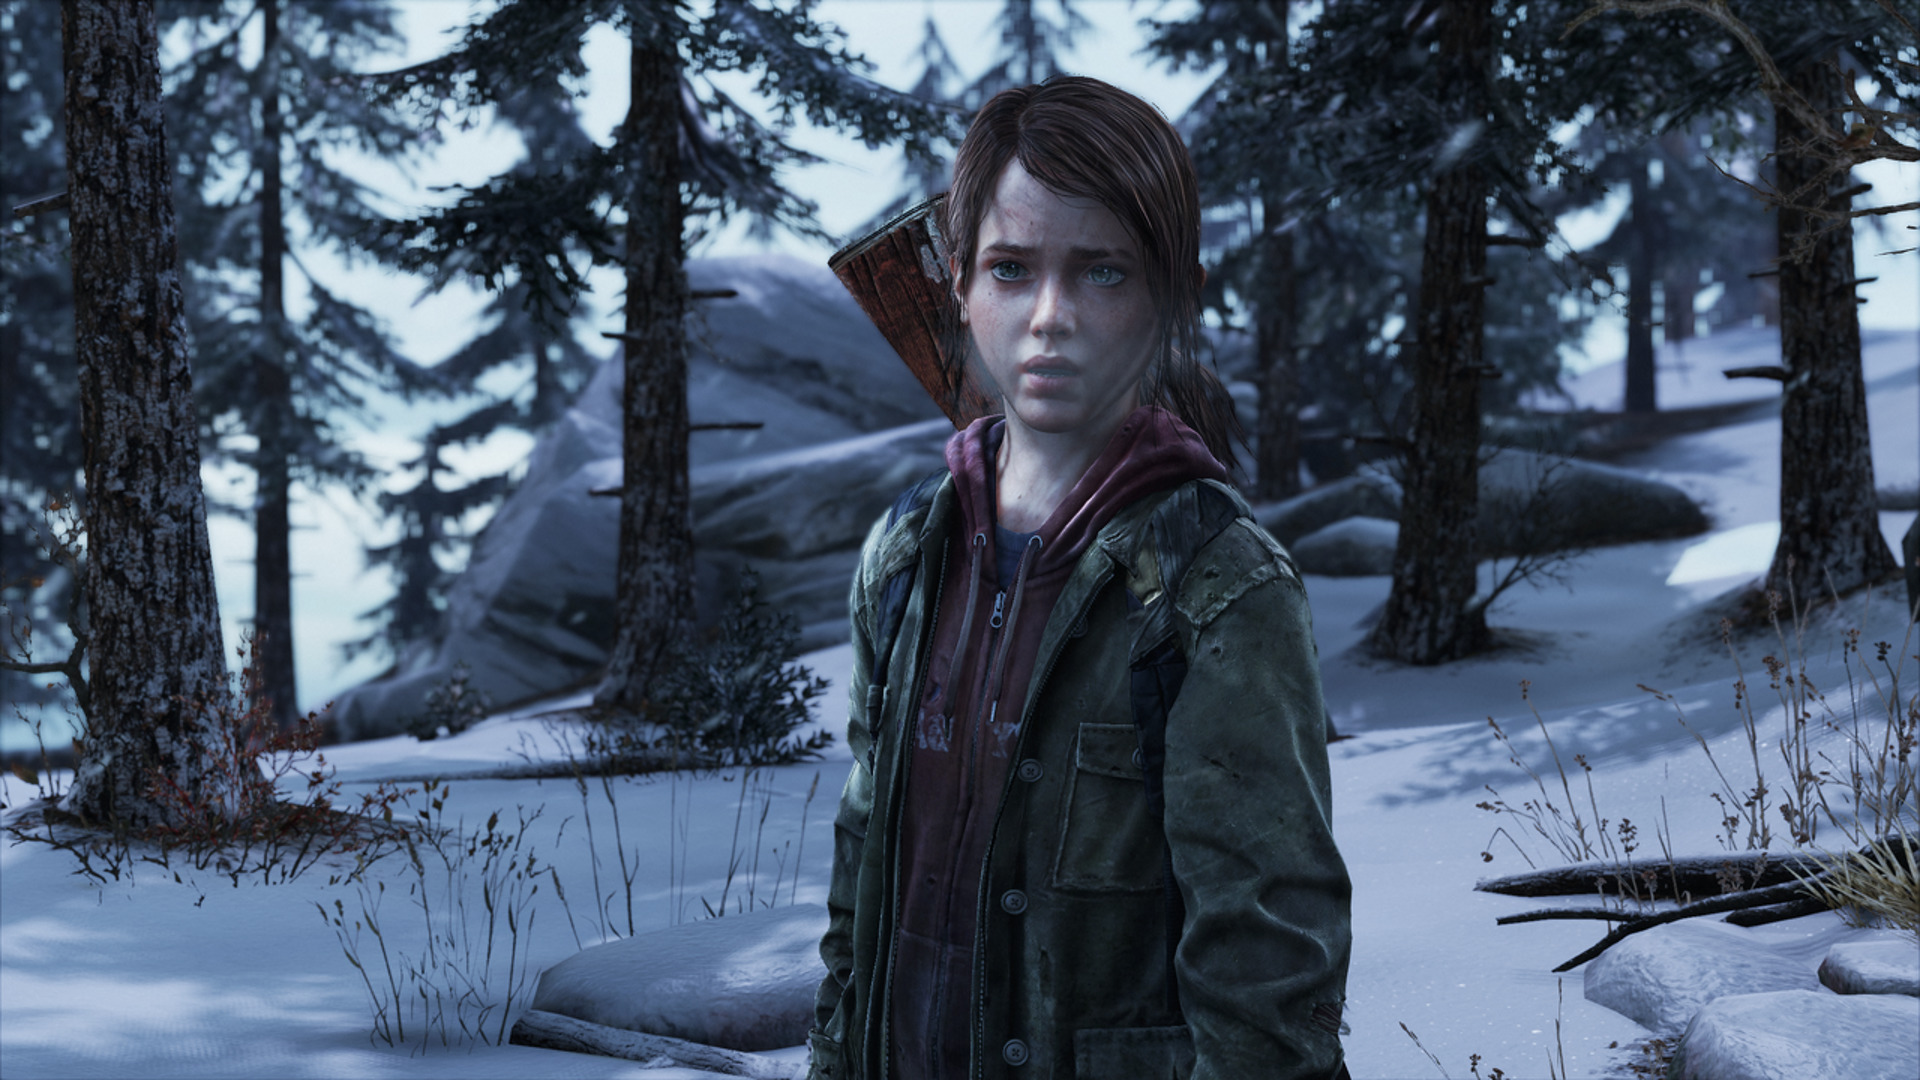 The Last Of Us, Apocalyptic, Winter, Ellie, Video Games Wallpaper